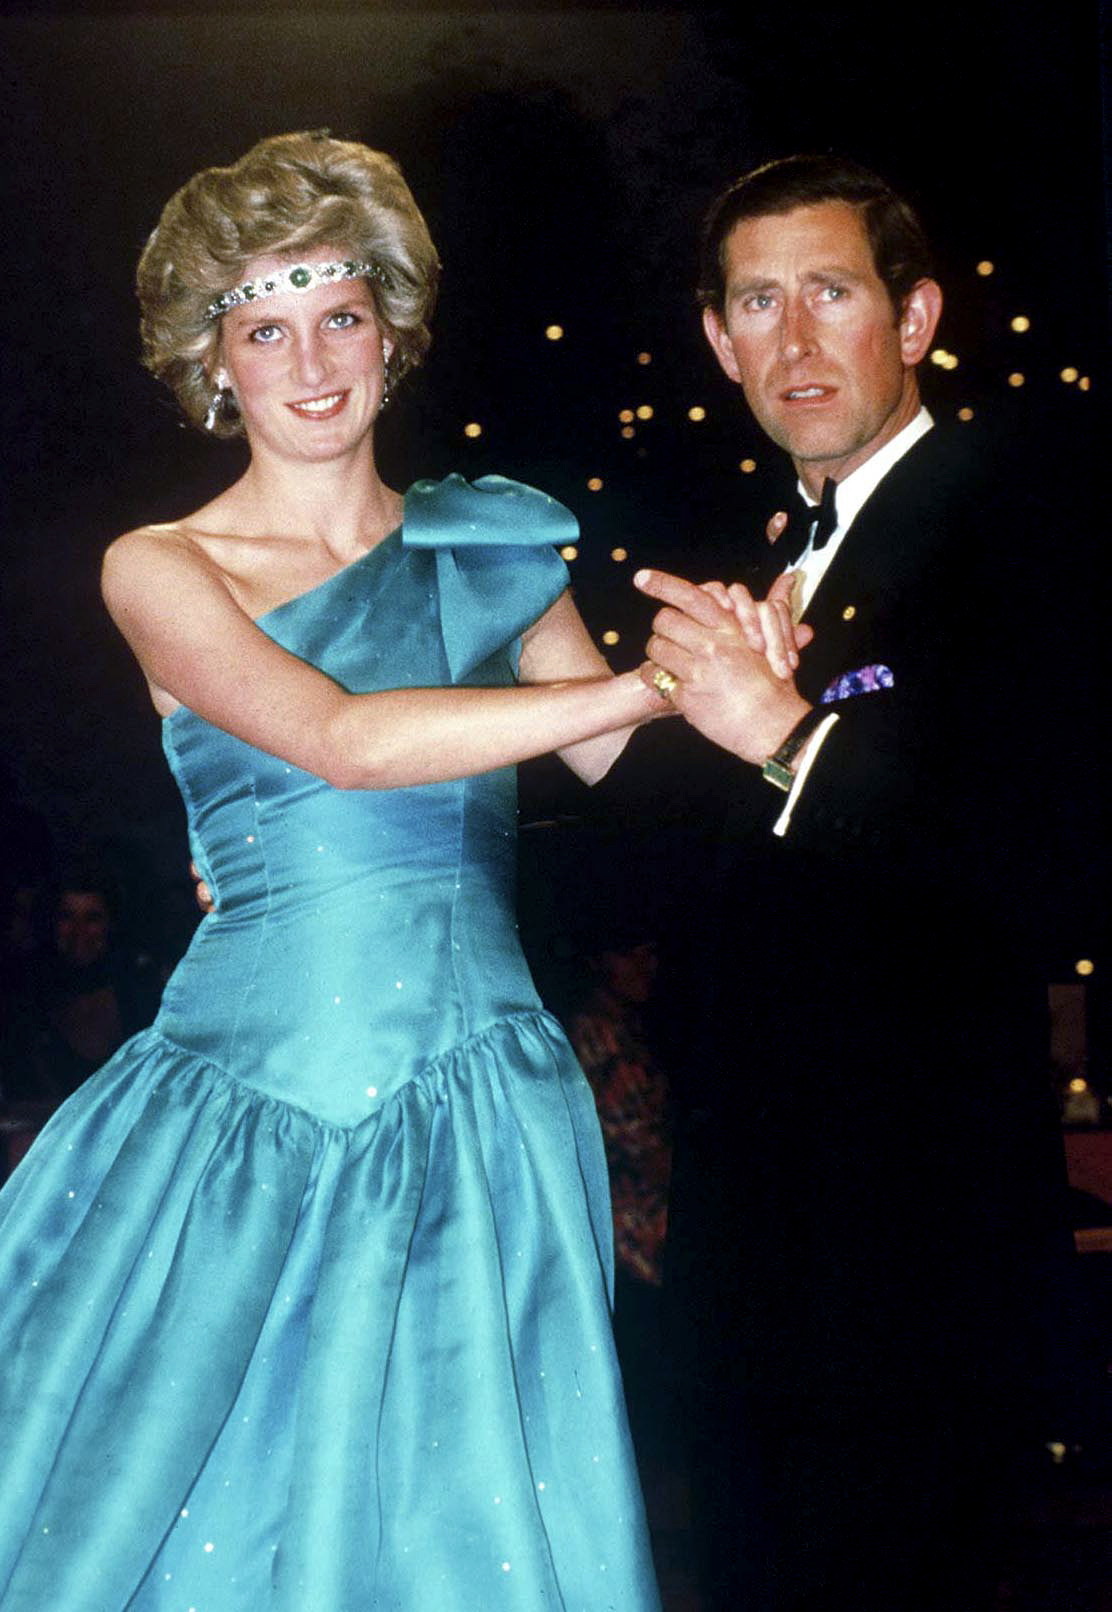 <p>This heartbreaking cheating scandal is one that took the world by storm. While married to Princess Diana, Prince Charles engaged in a long-term affair with former girlfriend Camilla Parker Bowles. He even gave Camilla a personalized bracelet days before he married Diana in 1981. In a 1995 interview with Martin Bashir on the BBC's "Panorama," Diana famously said of Charles's infidelity, "There were three of us in this marriage, so it was bit crowded." In 1994, Charles publicly copped to cheating. "Yes," he said when asked if he'd been unfaithful. "Until it became clear that the marriage had irretrievably broken down," he added.</p>